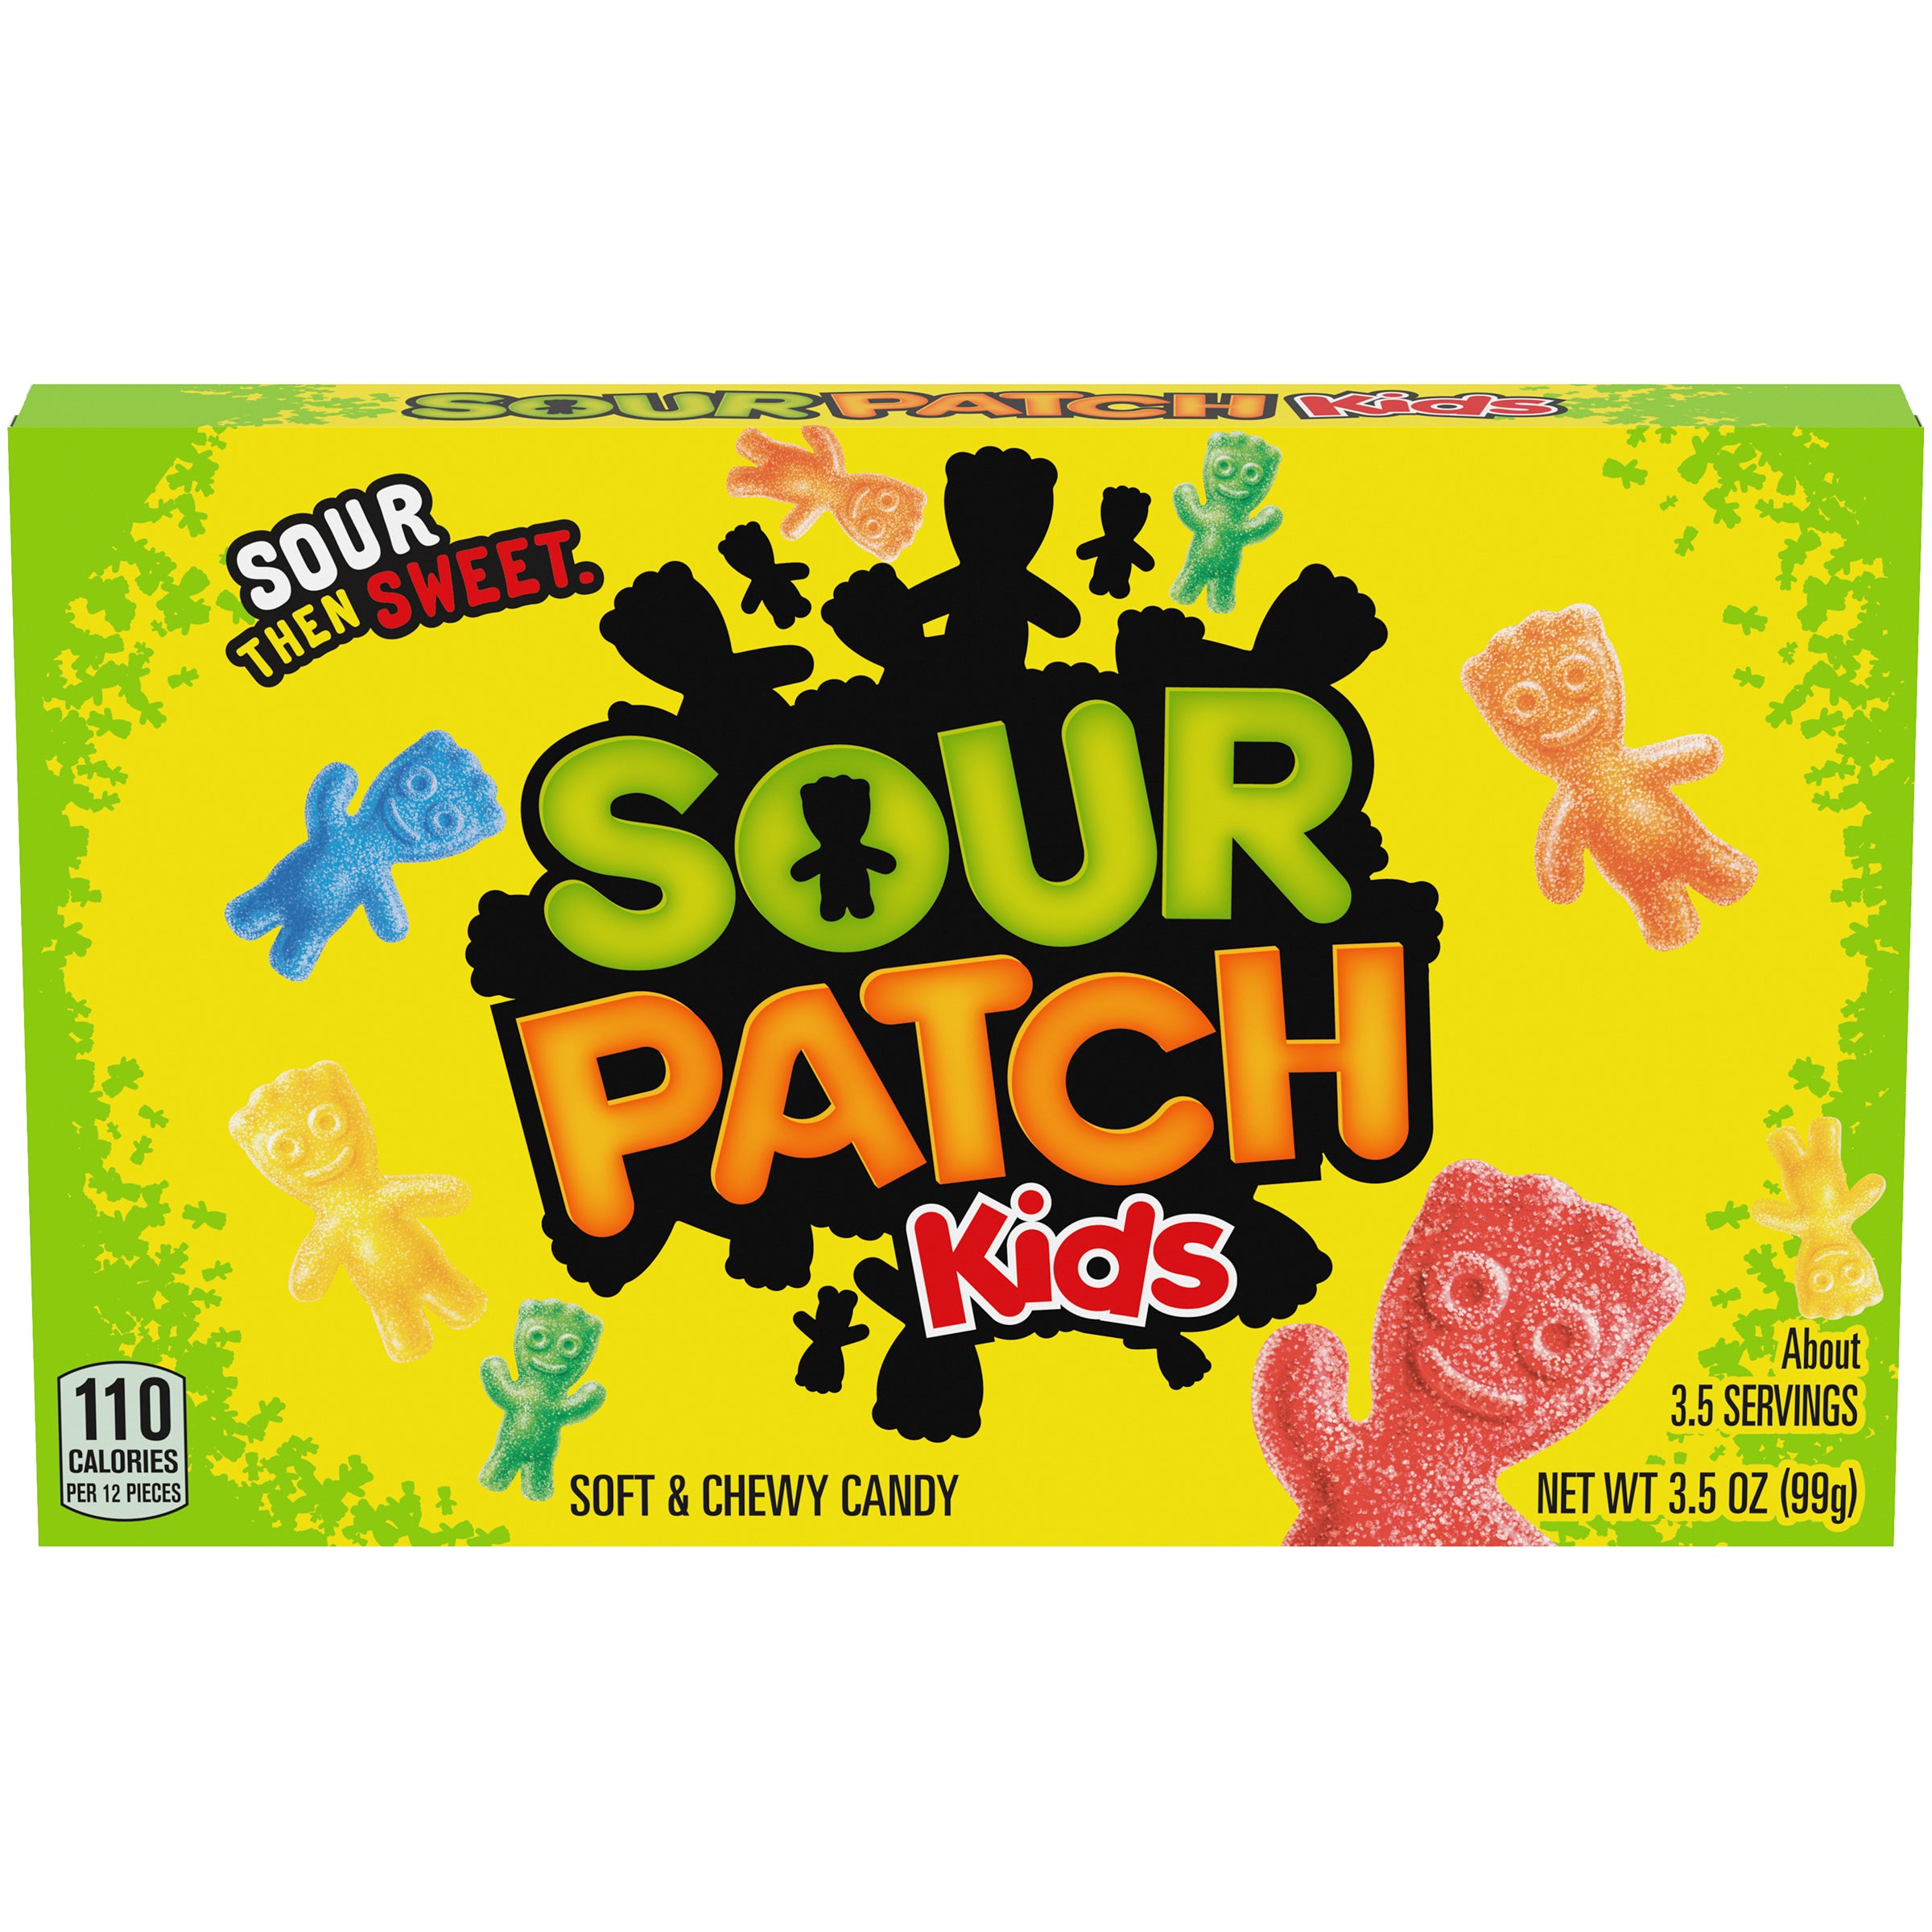 SOUR PATCH KIDS THEATER BOX